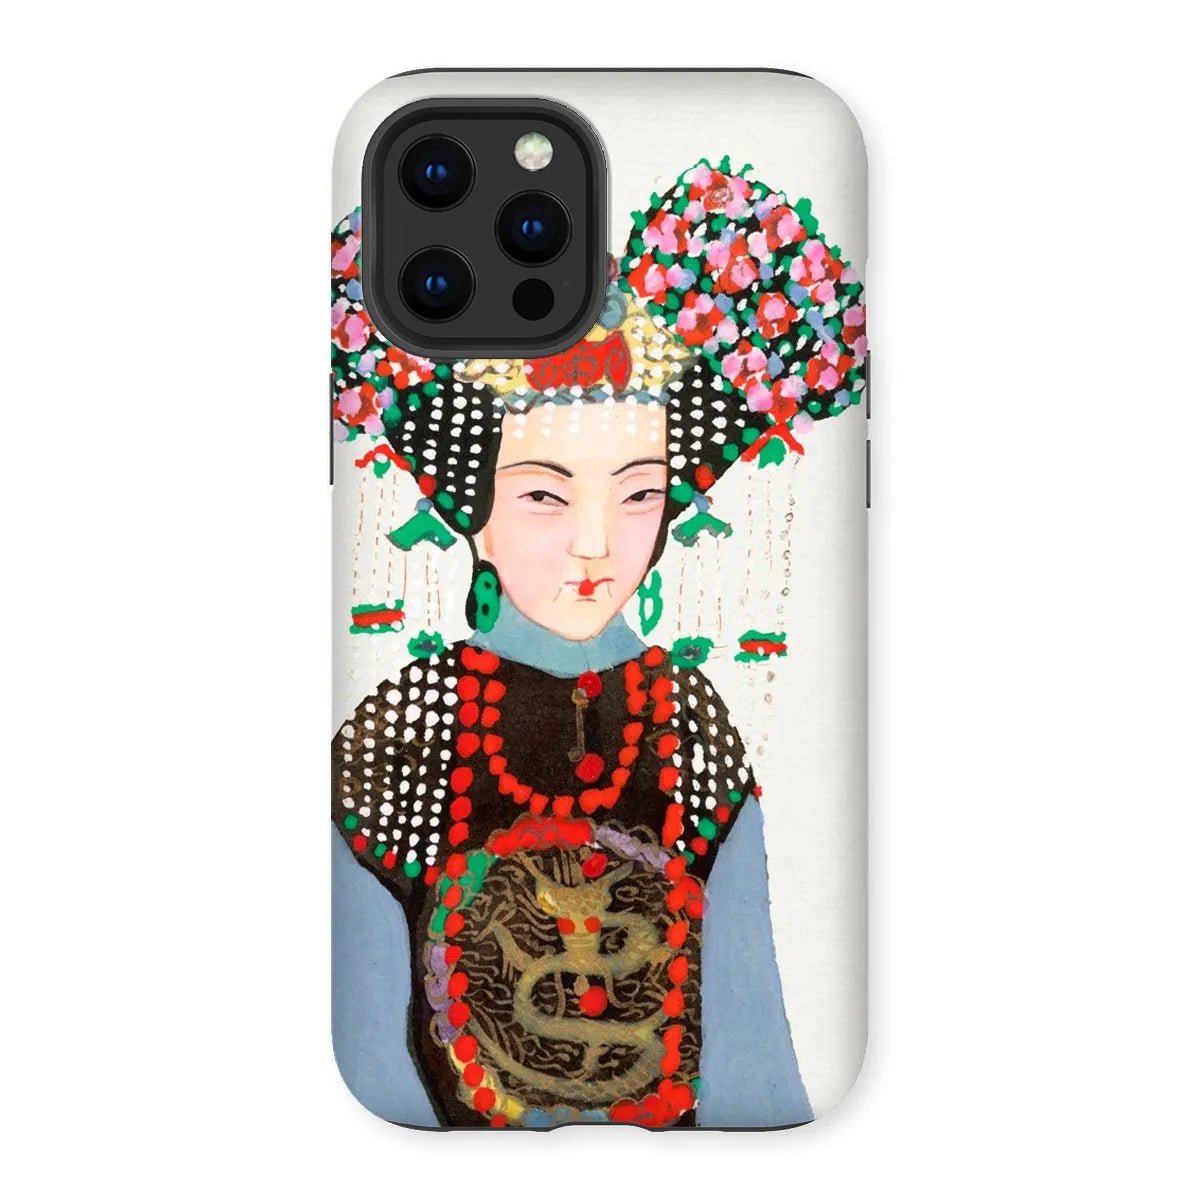 Chinese Empress - Manchu Art Phone Case - Iphone 12 Pro Max / Matte - Mobile Phone Cases - Aesthetic Art